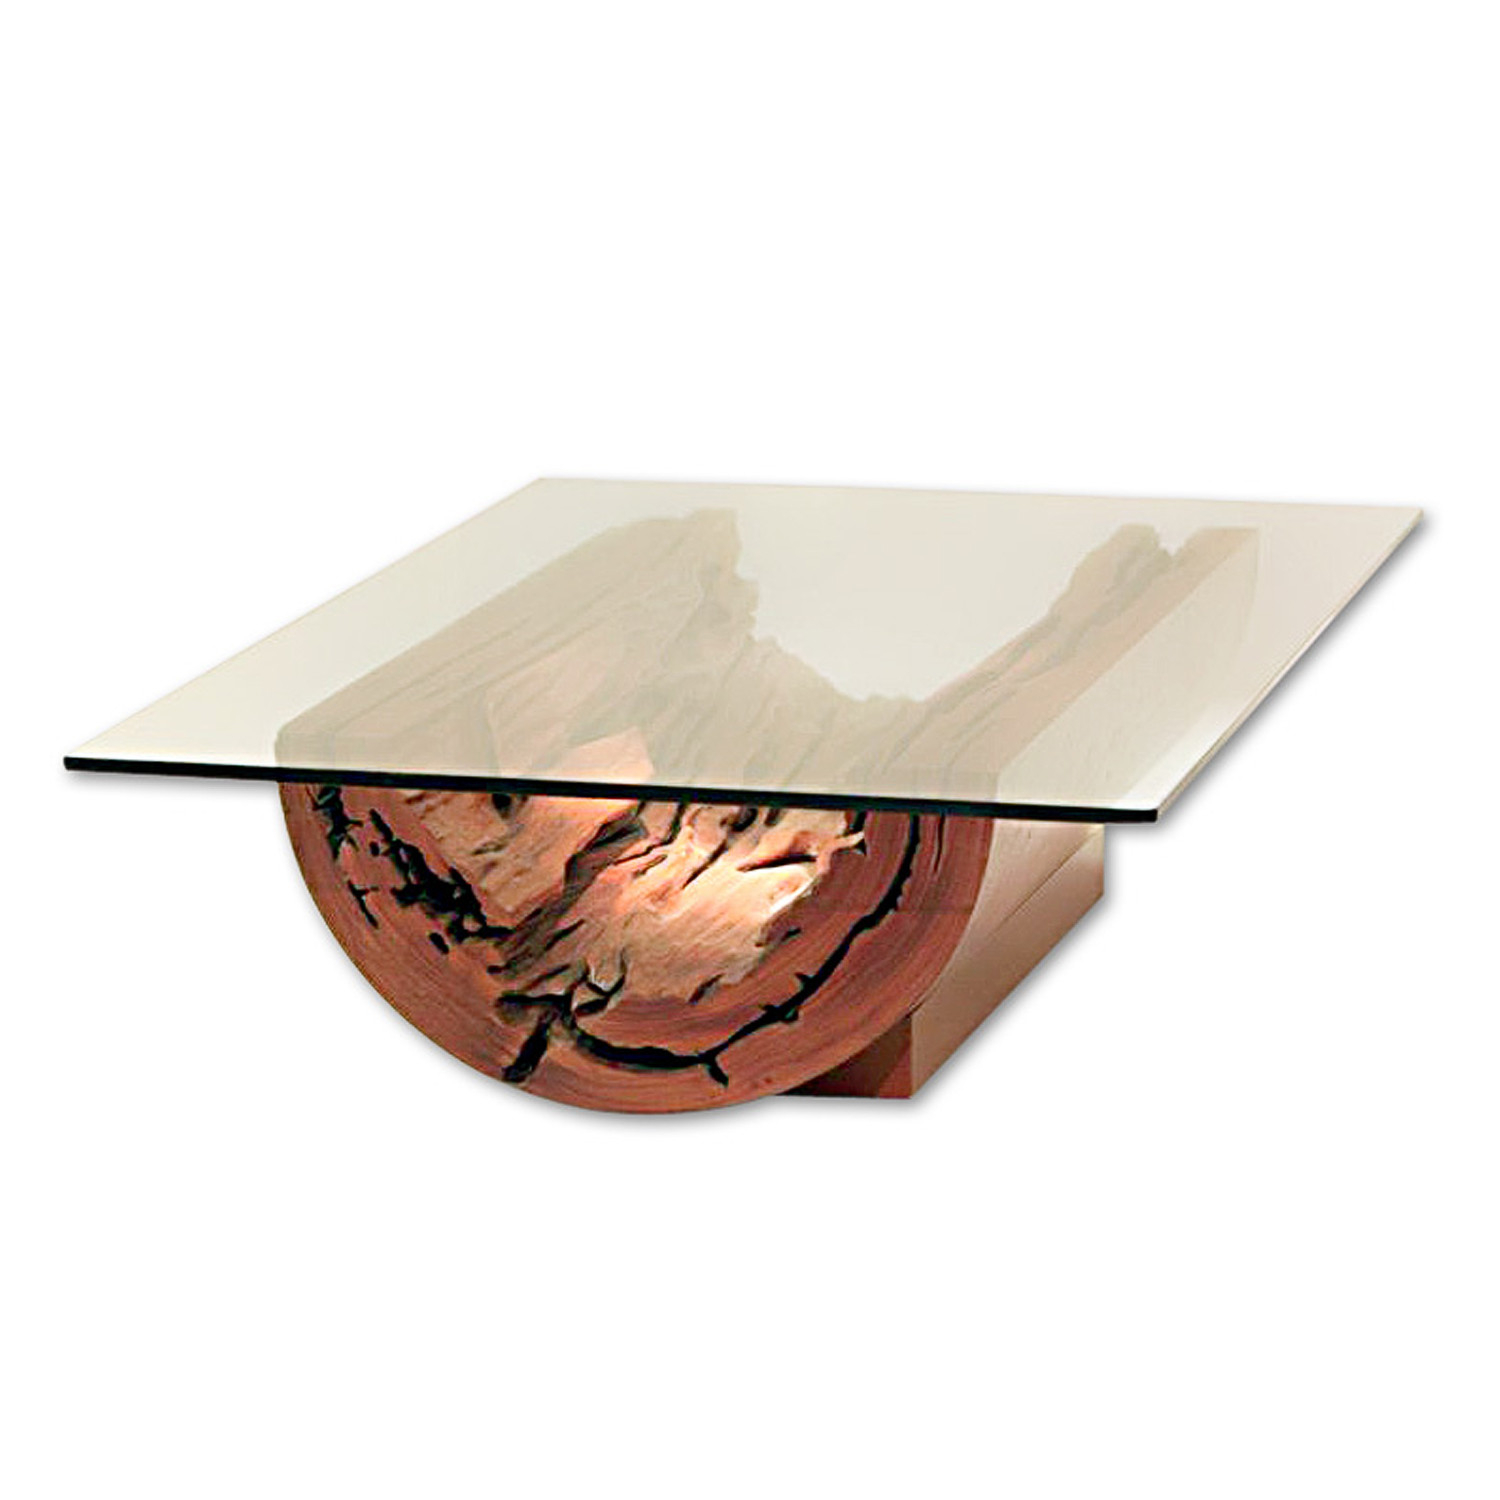 Square wood and glass coffee table 14